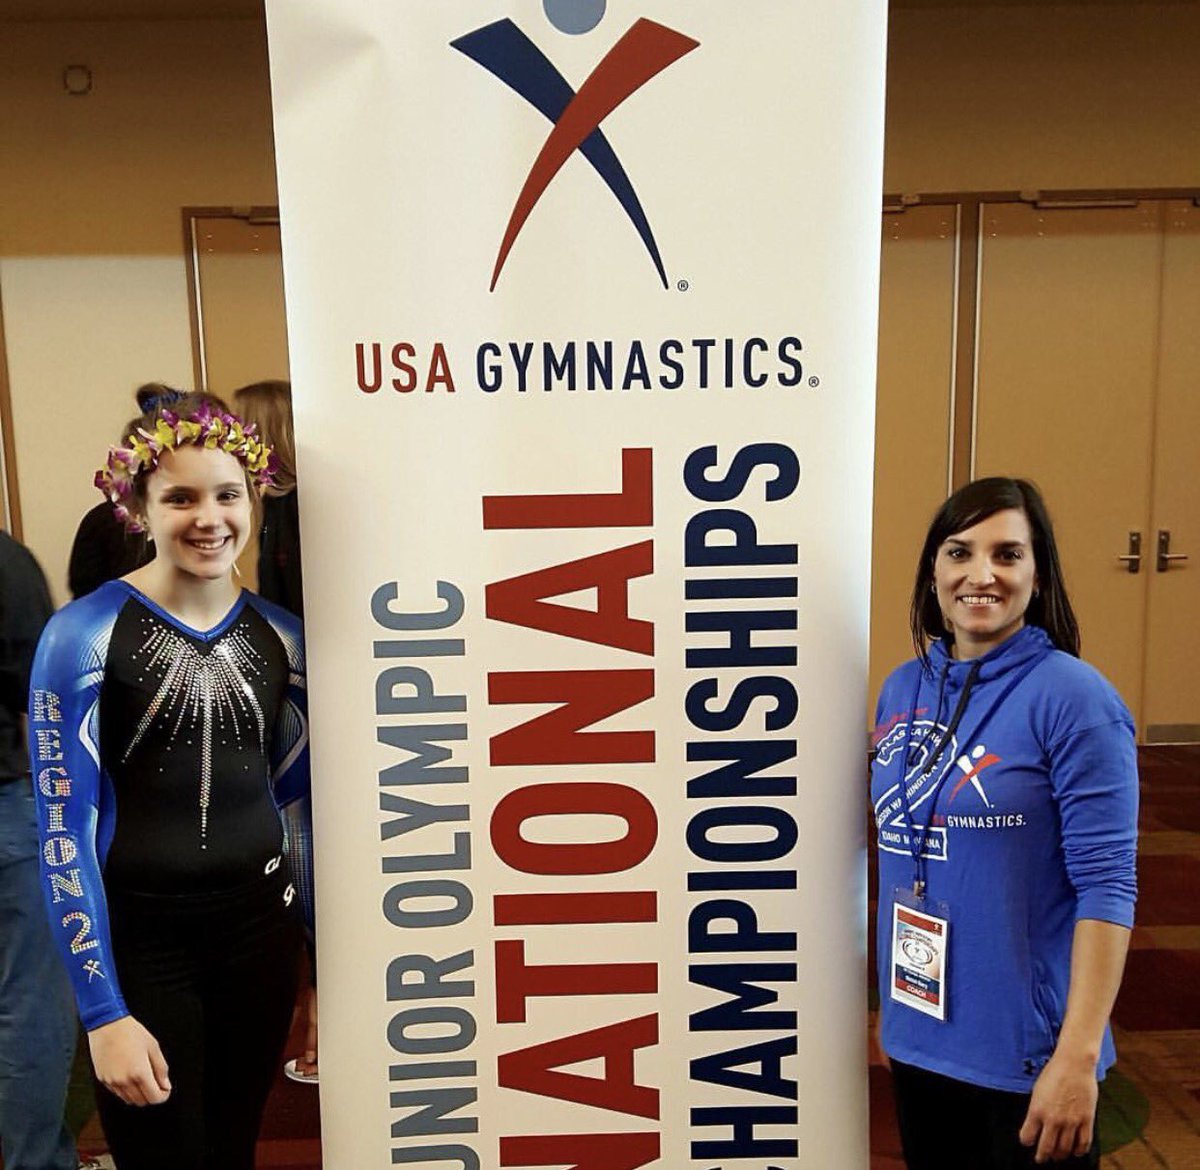 1st female Athlete to qualify to JONationals from OOA. I'm so proud of this girl! Congrats on an amazing season Lauren! #gymnastics #teamOOA